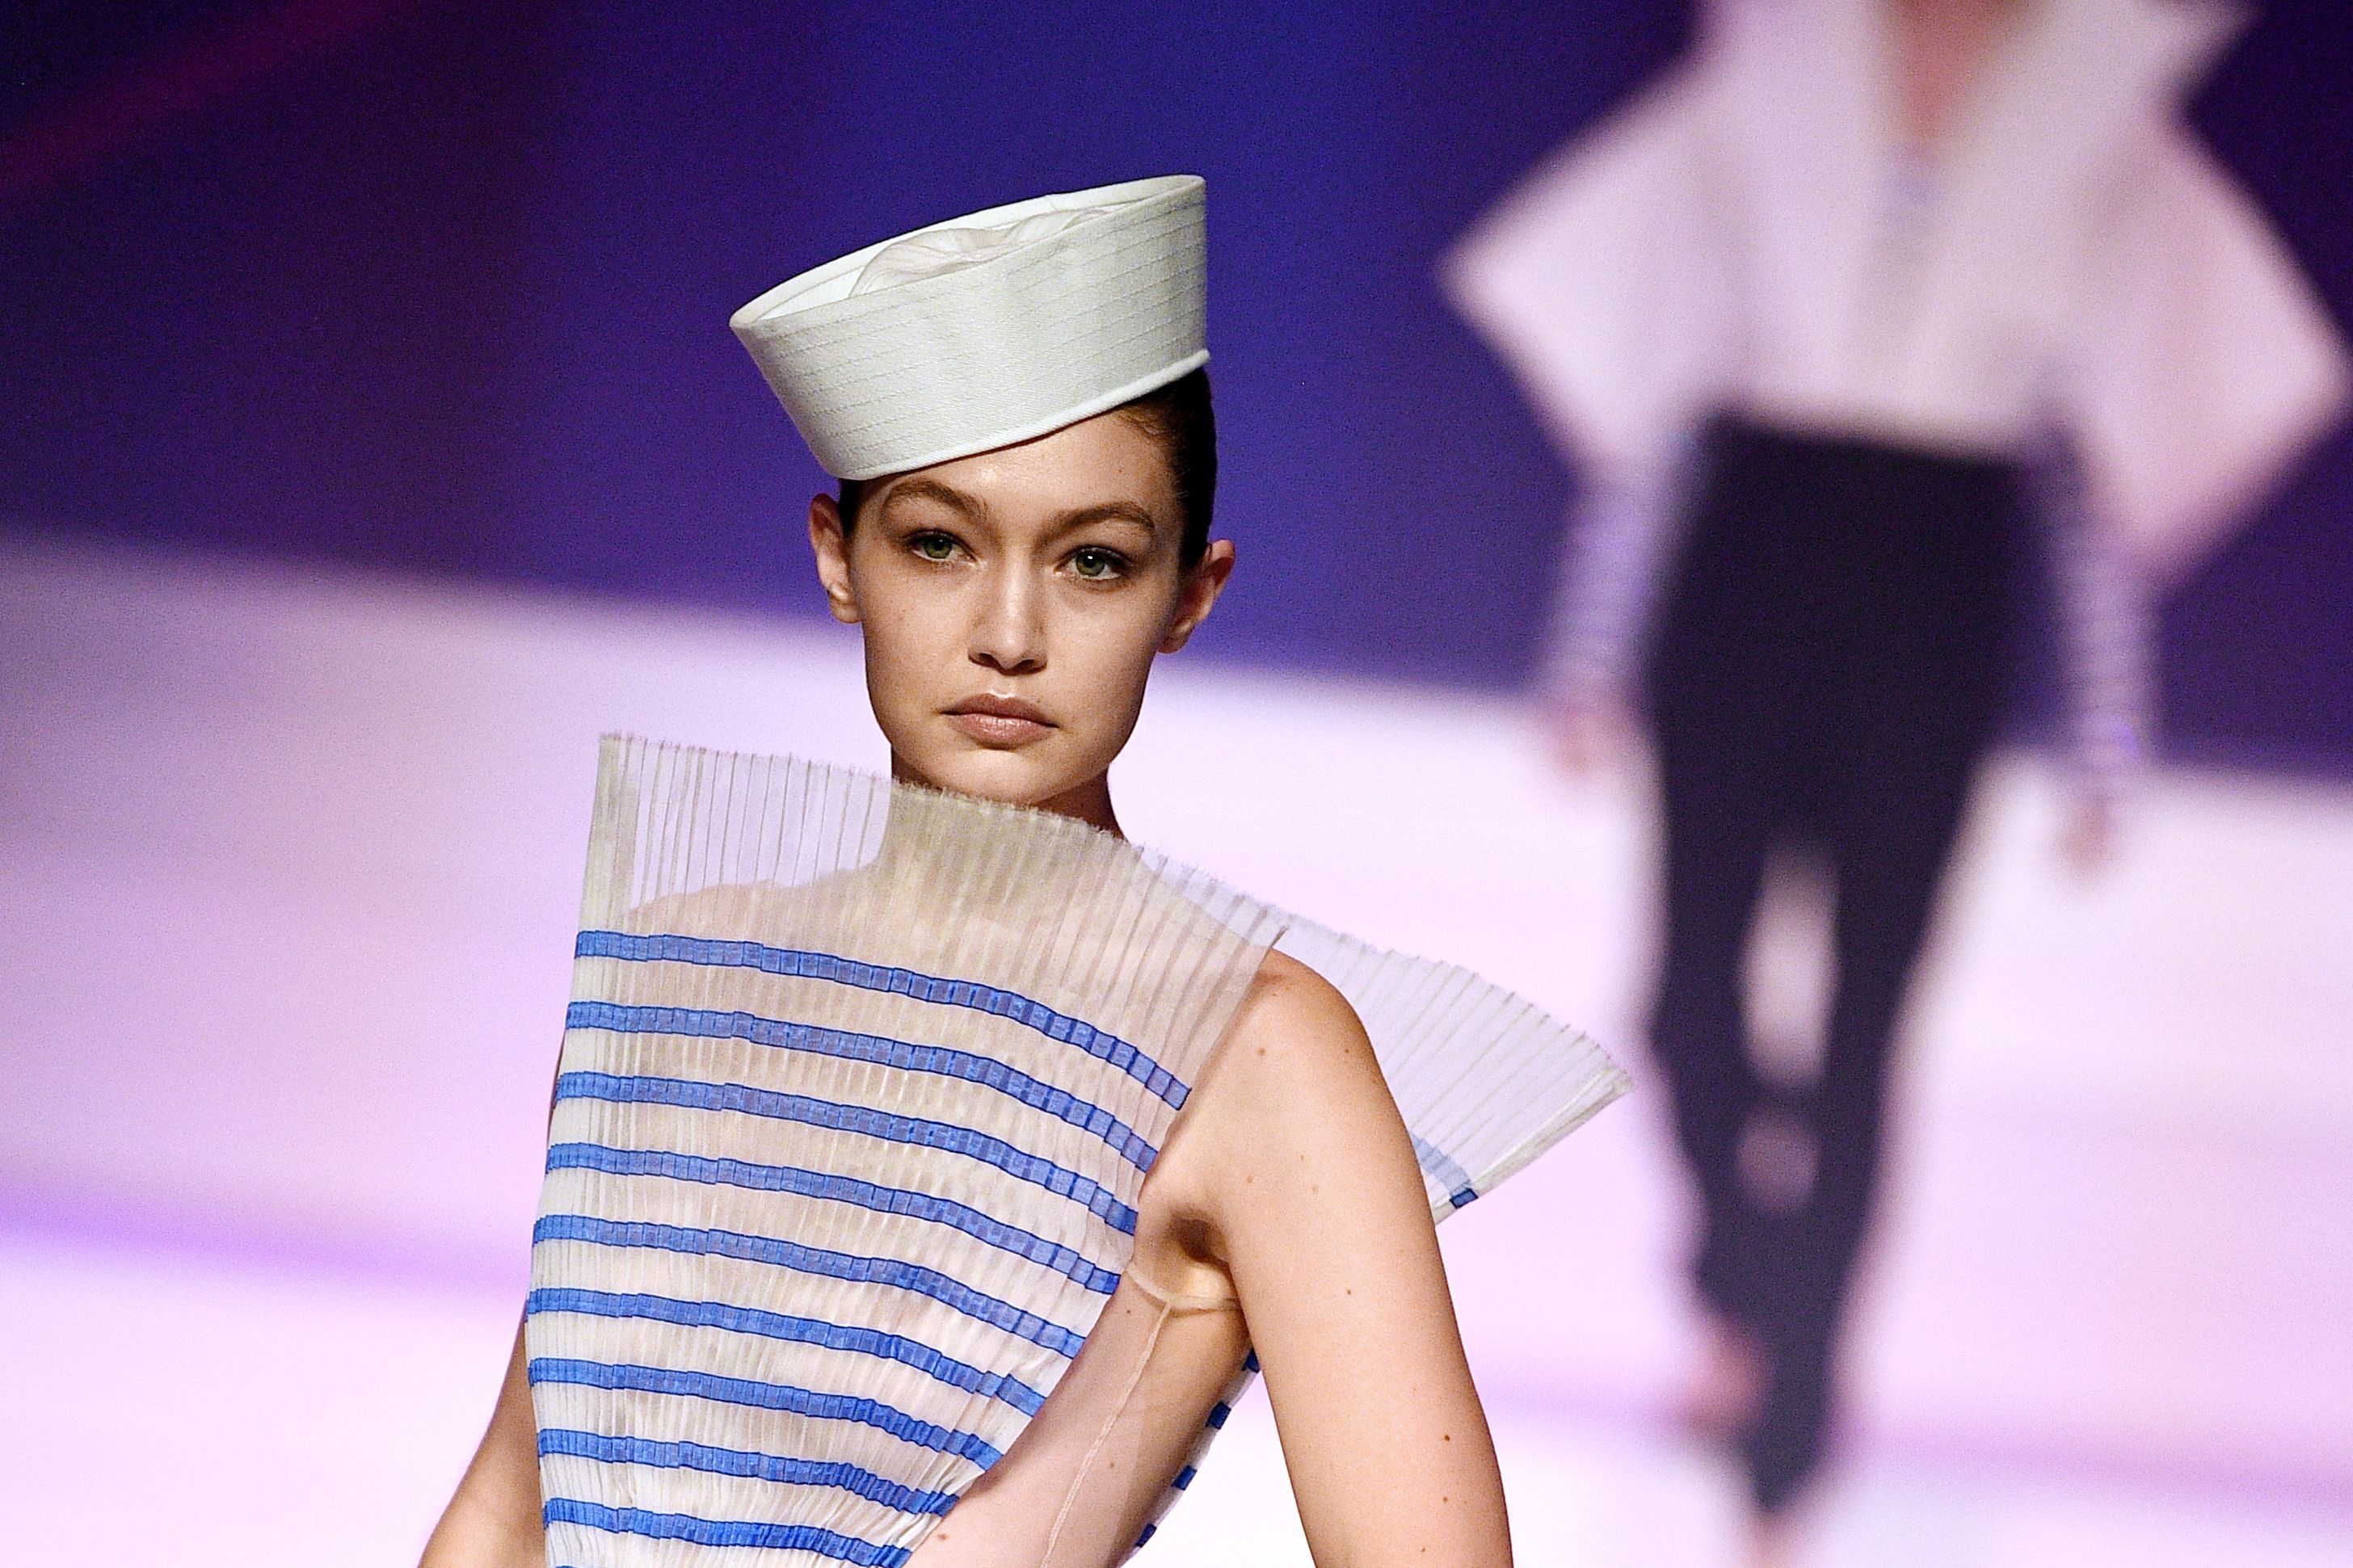 Jean Paul Gaultier's final couture show in pictures